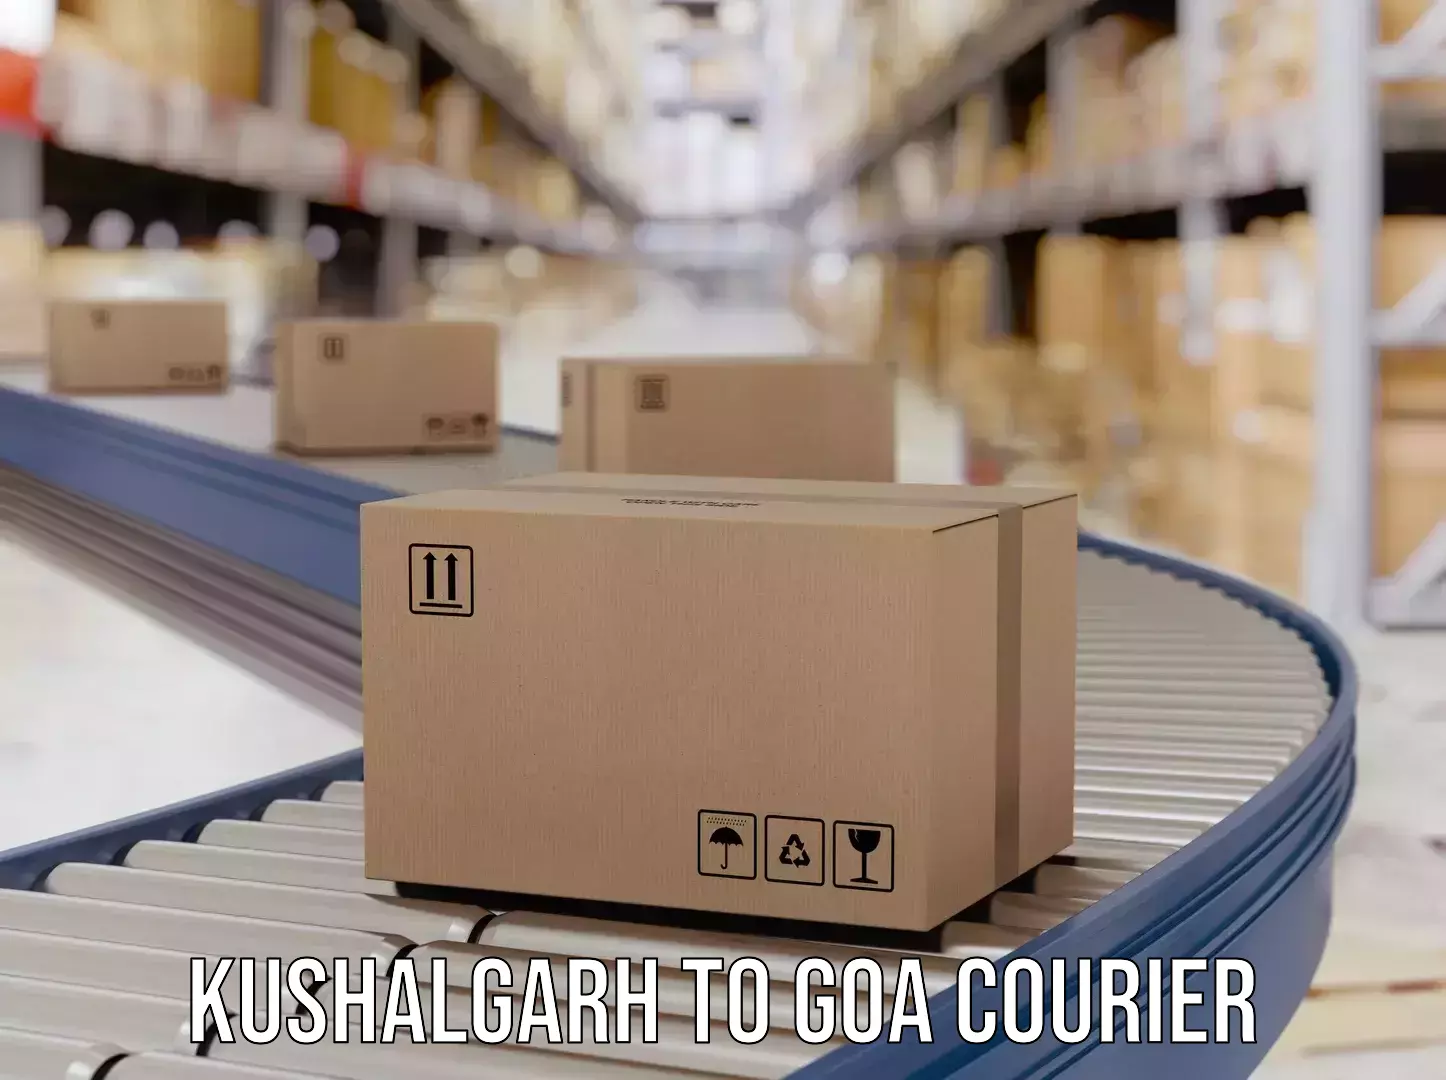 State-of-the-art courier technology Kushalgarh to Goa